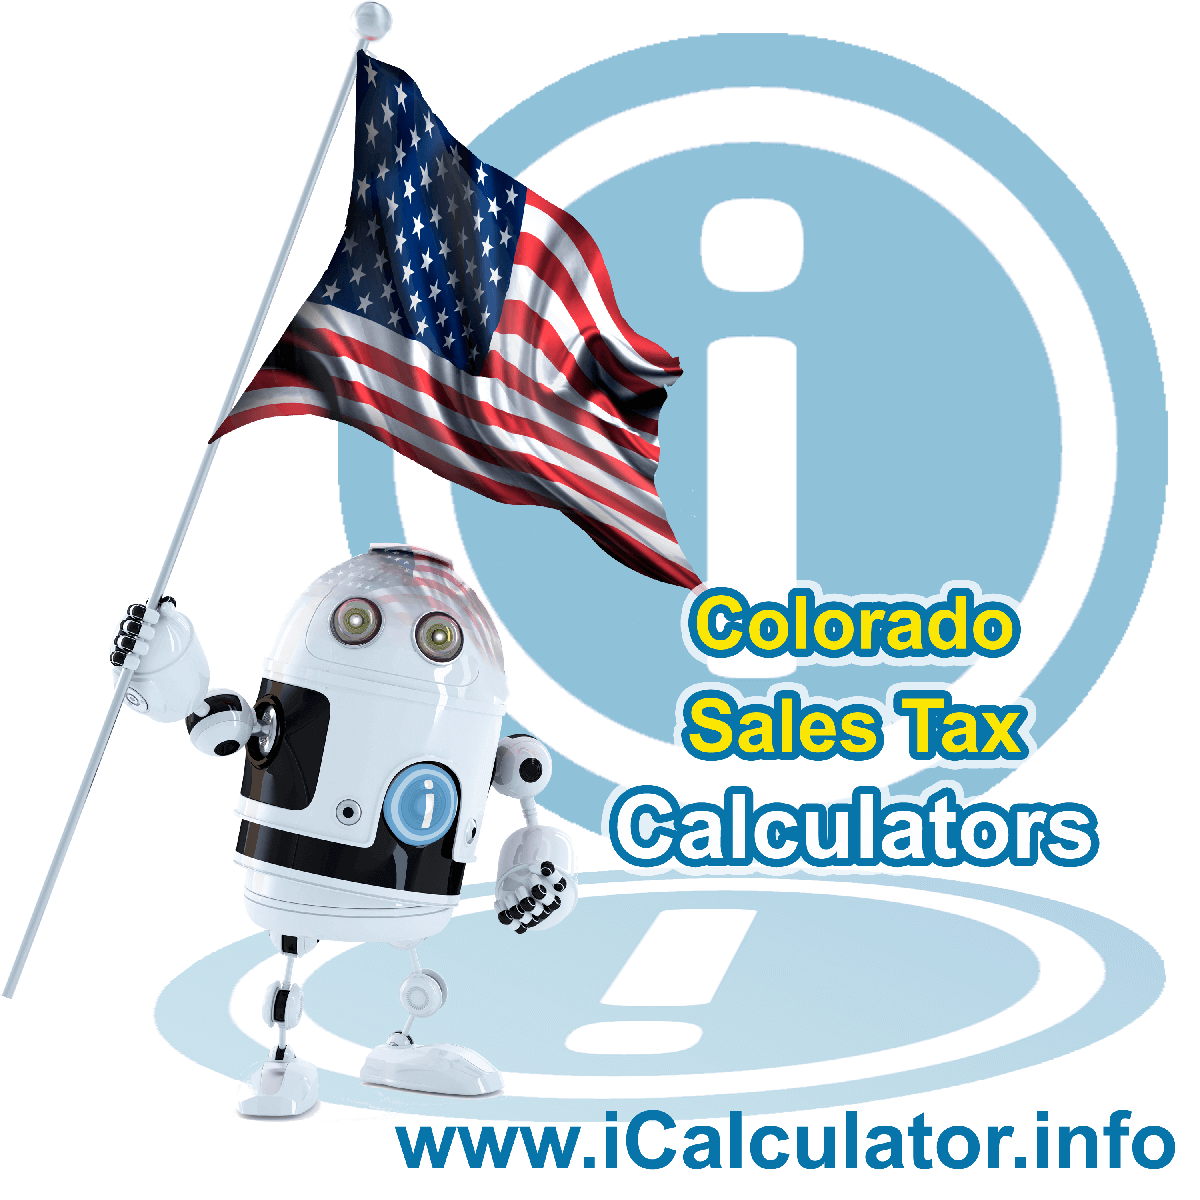 Longmont Sales Rates: This image illustrates a calculator robot calculating Longmont sales tax manually using the Longmont Sales Tax Formula. You can use this information to calculate Longmont Sales Tax manually or use the Longmont Sales Tax Calculator to calculate sales tax online.